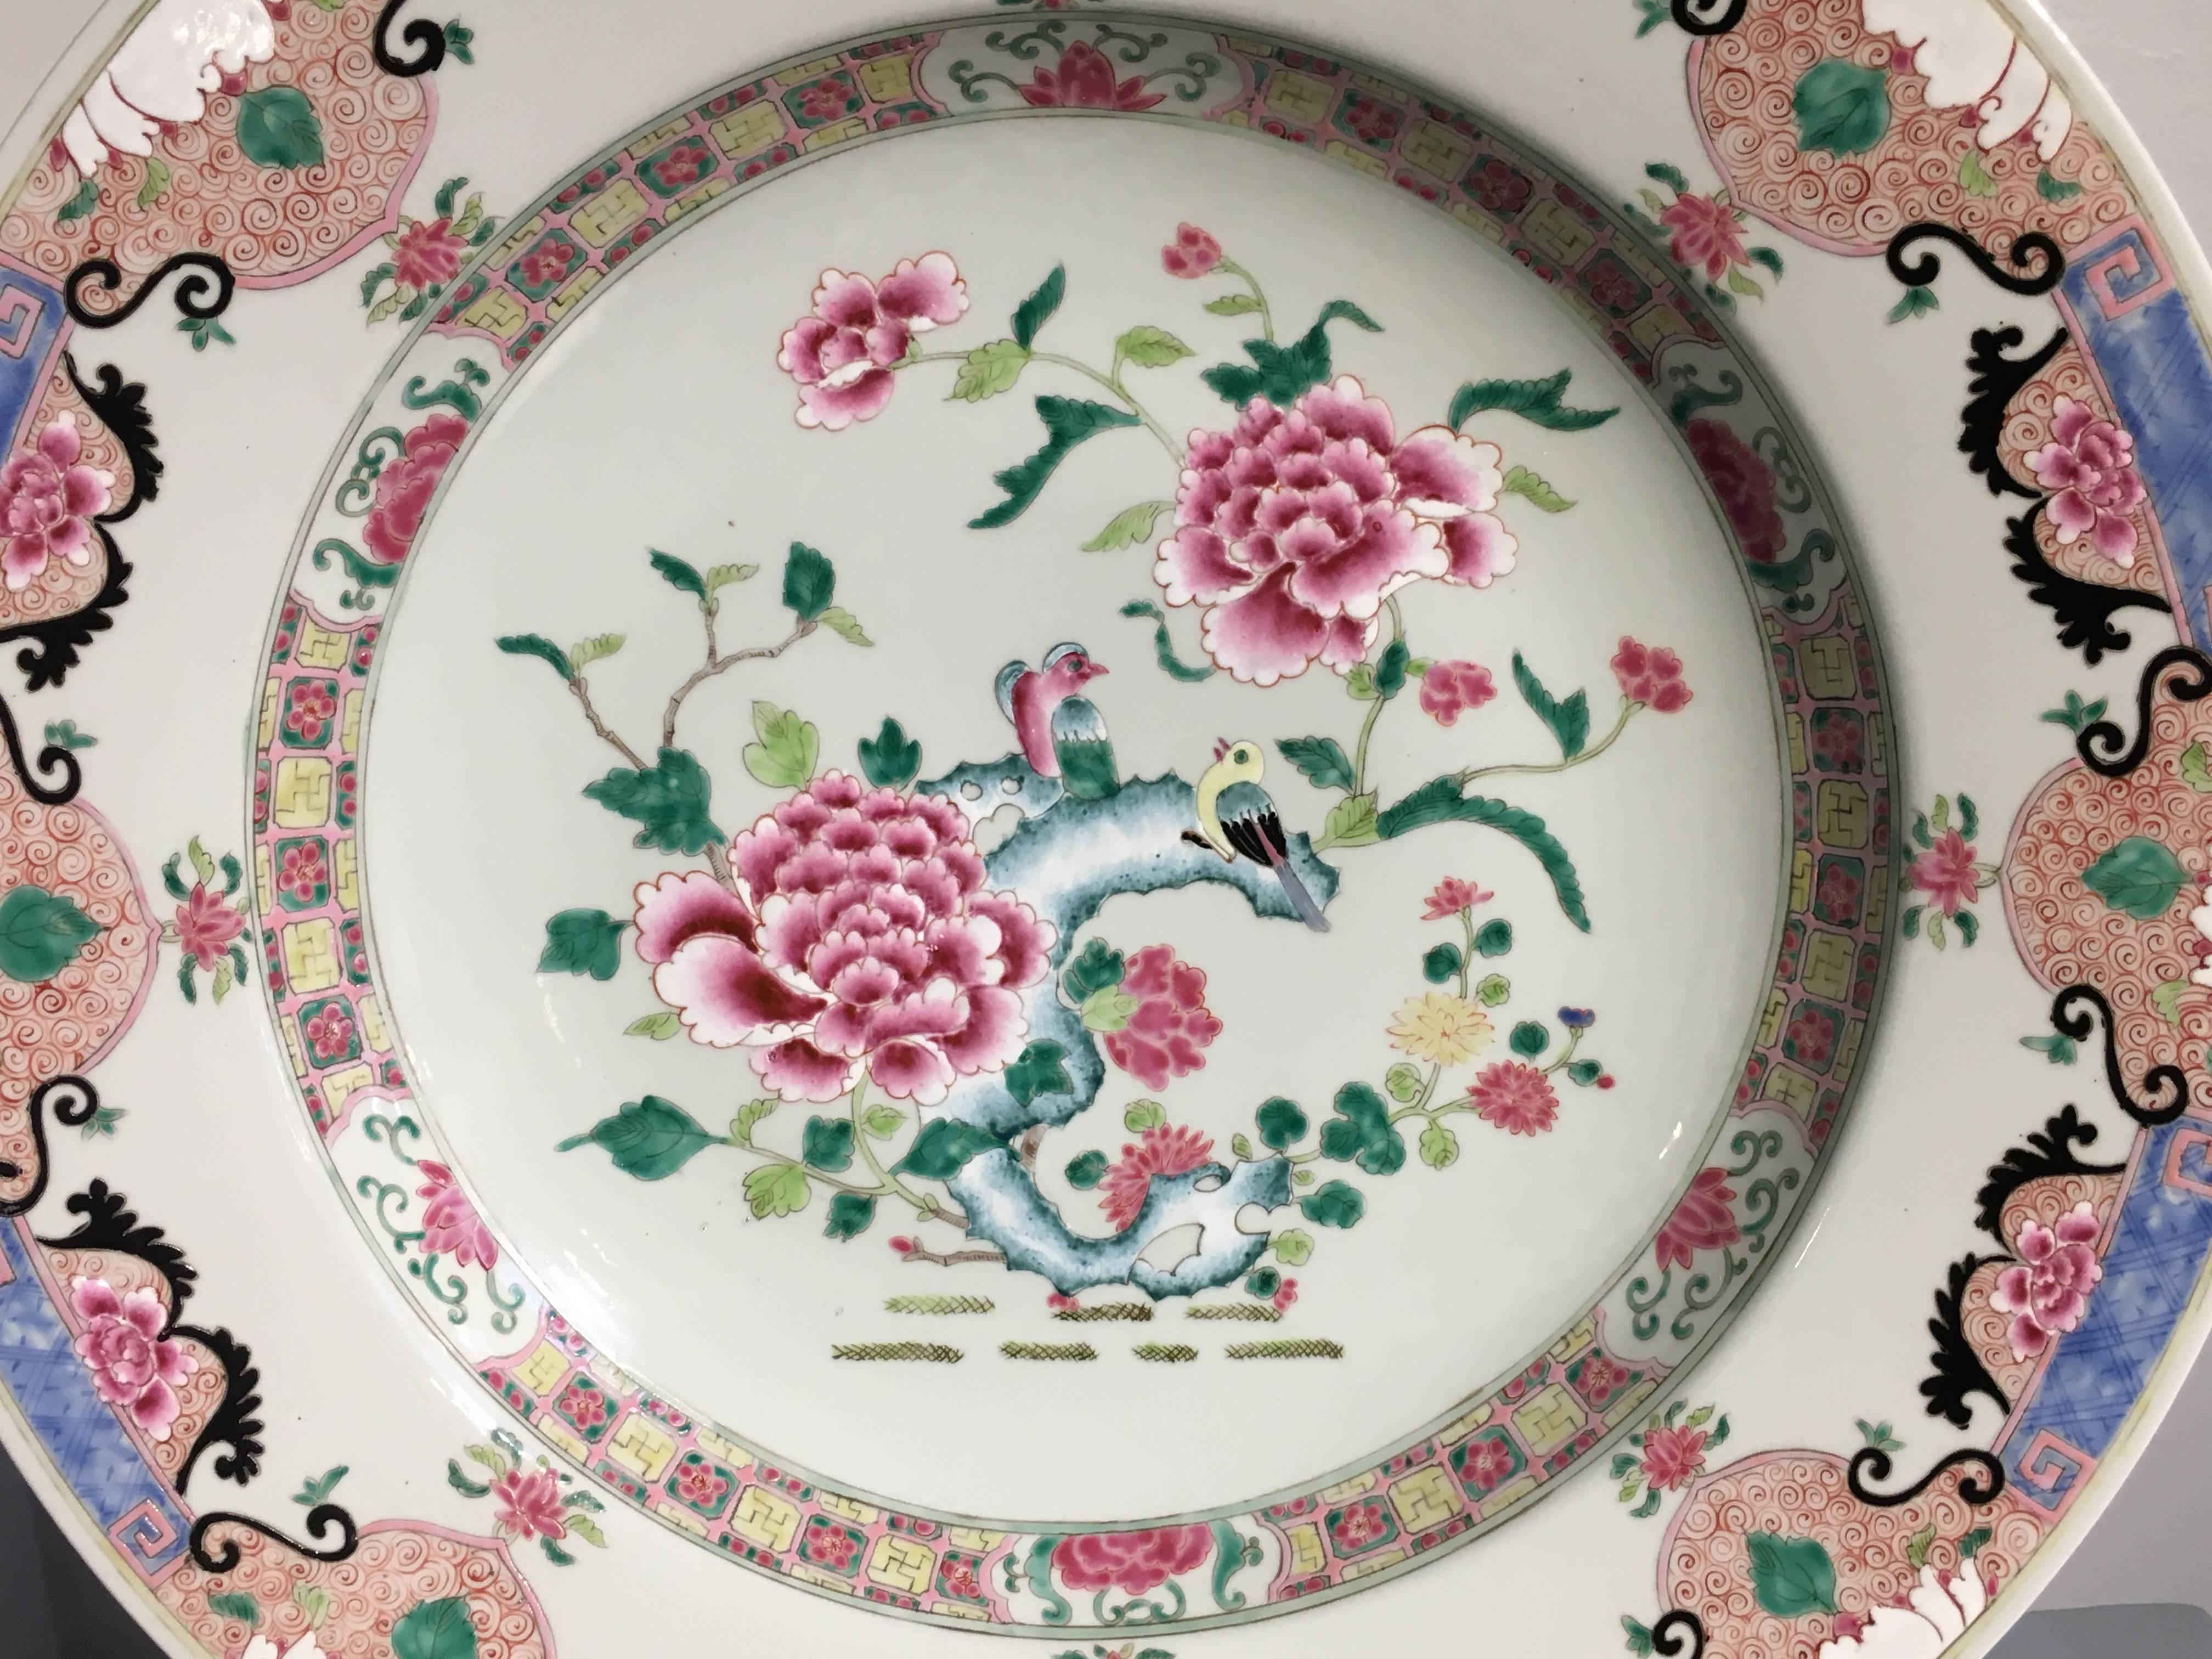 A large Yongzheng style Chinese porcelain charger decorated in beautiful famille rose enamels of pinks, blues, greens and yellows, 20th century, China. 

Painted in the Chinese export manner with famille rose enamels in the Yongzheng color palette,